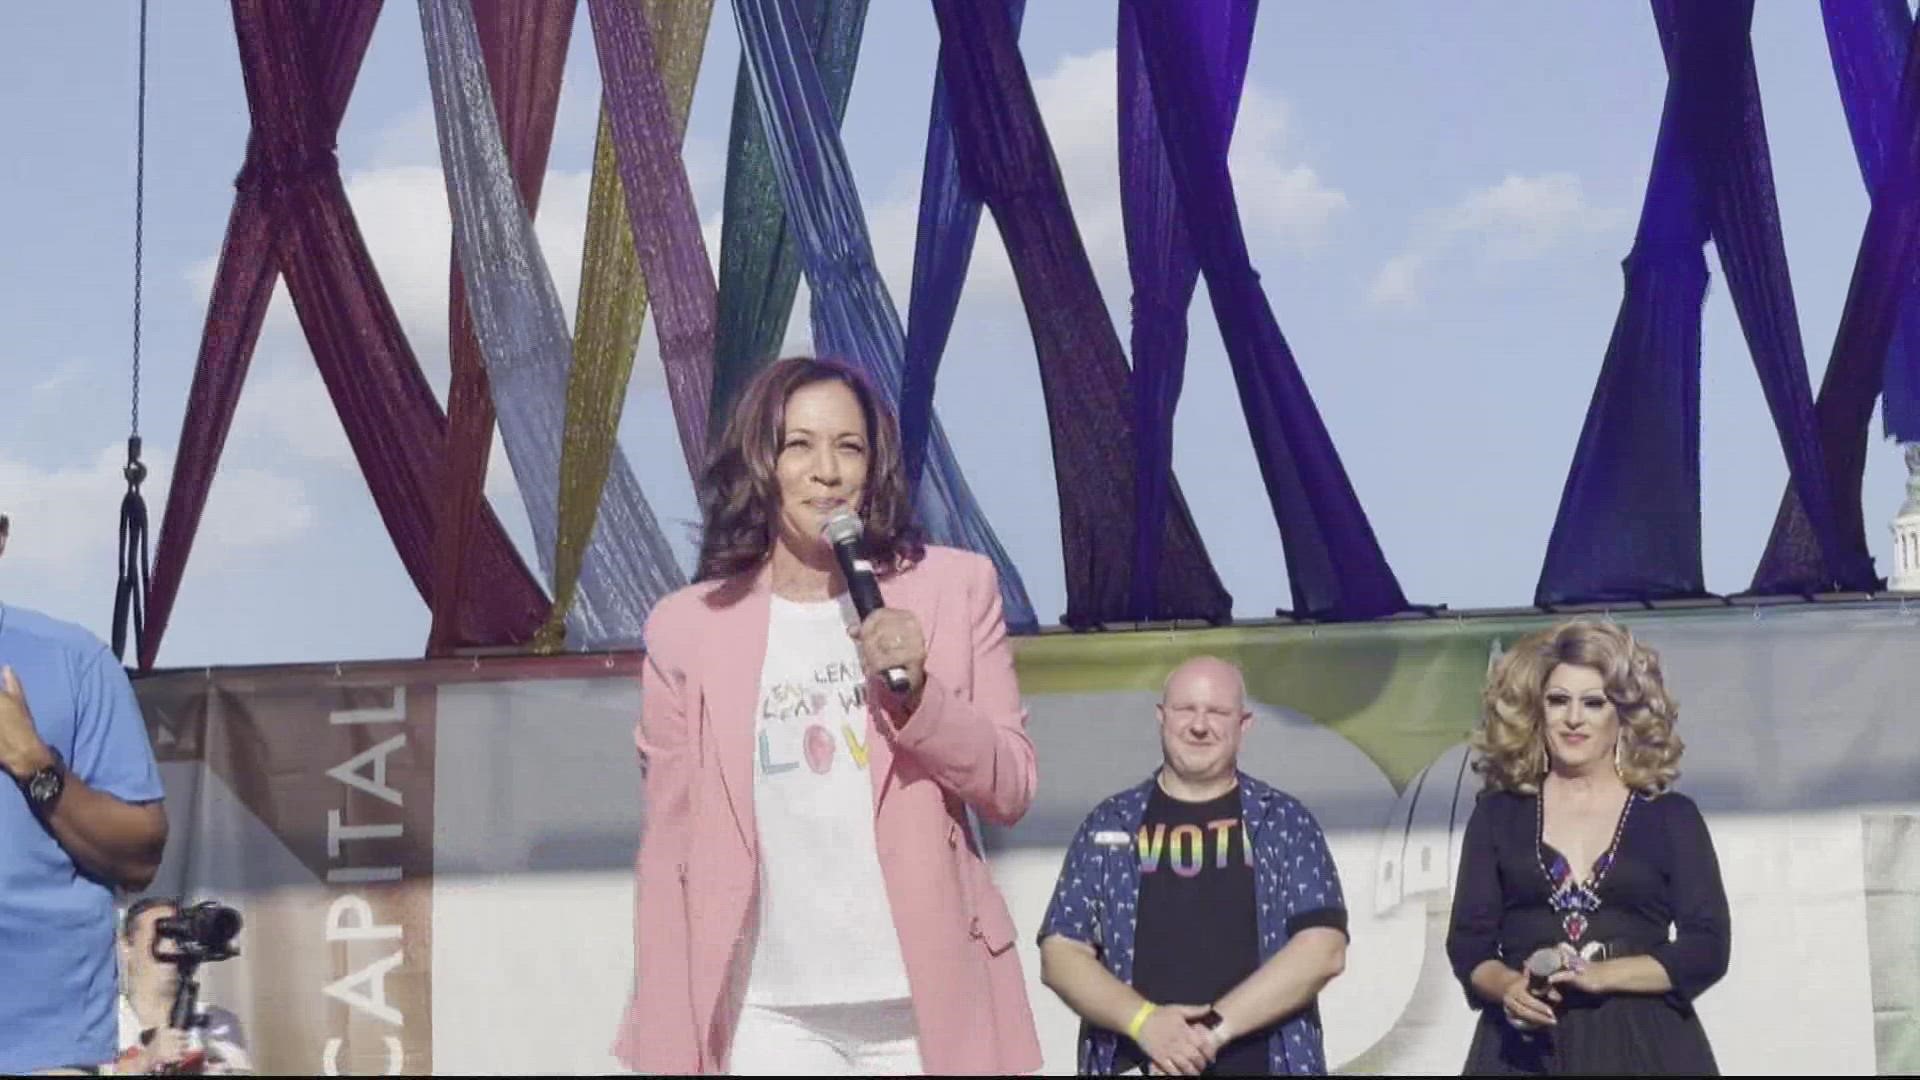 Vice President Kamala Harris and Second Gentleman Douglas Emhoff took to the main concert stage of the Capital Pride Festival on Sunday.